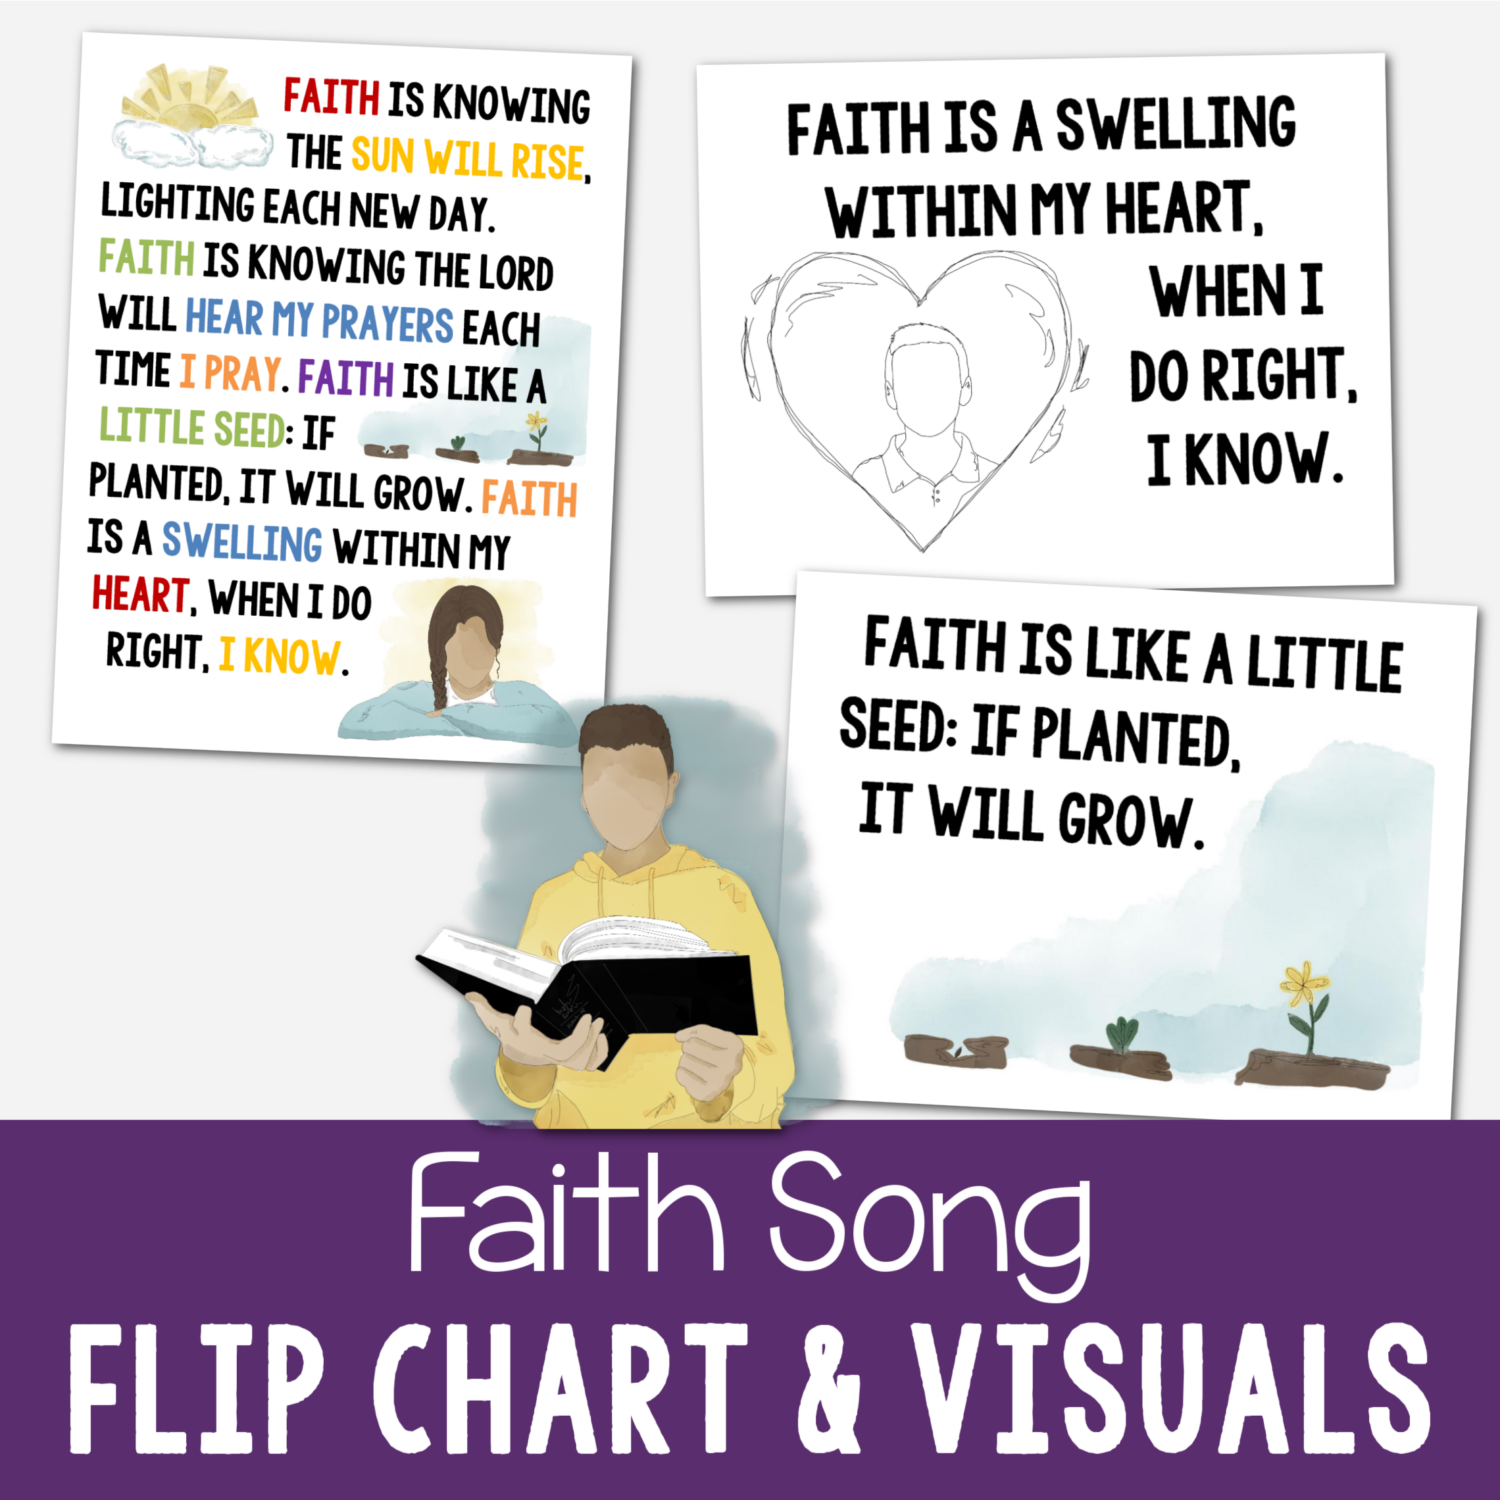 Shop Faith Flip Chart LDS Primary song visual aids teaching helps for Primary music leaders